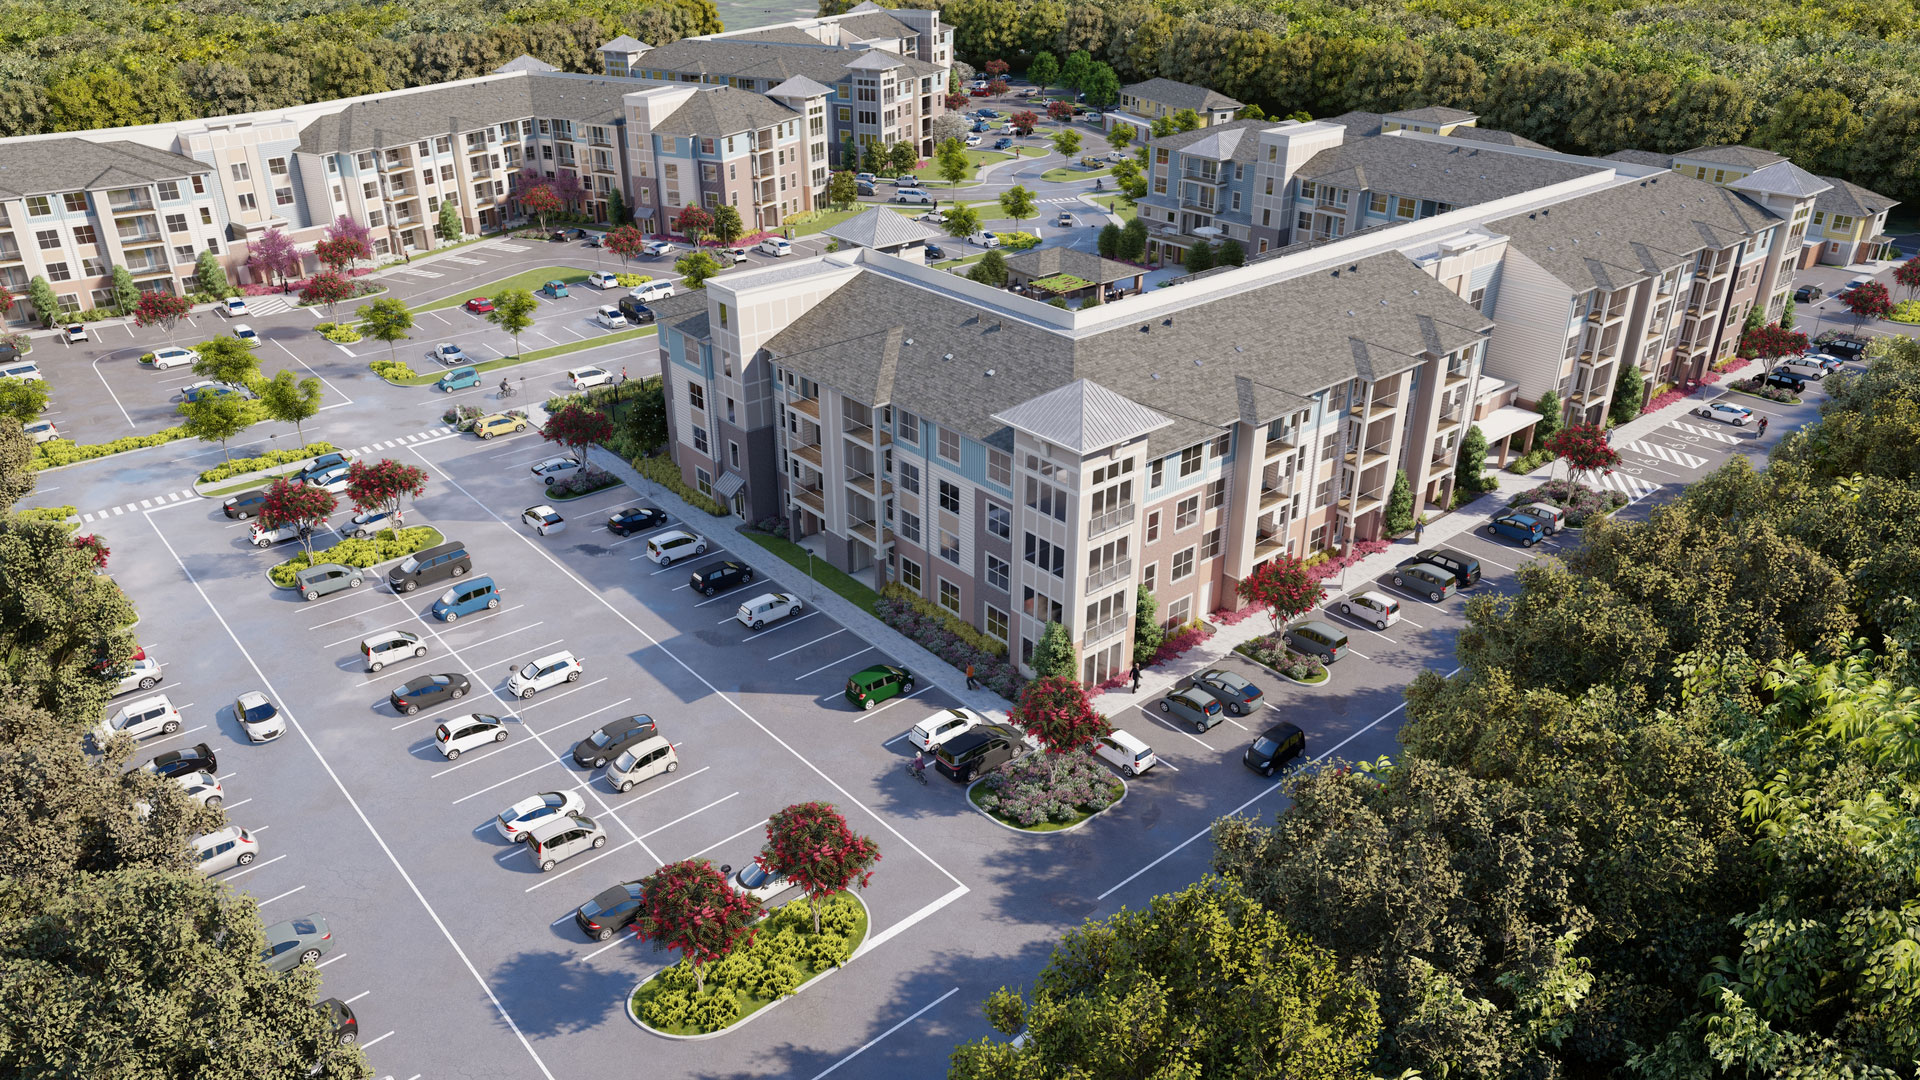 Aerial rendering view of the multifamily complex. Showing the building and parking lots